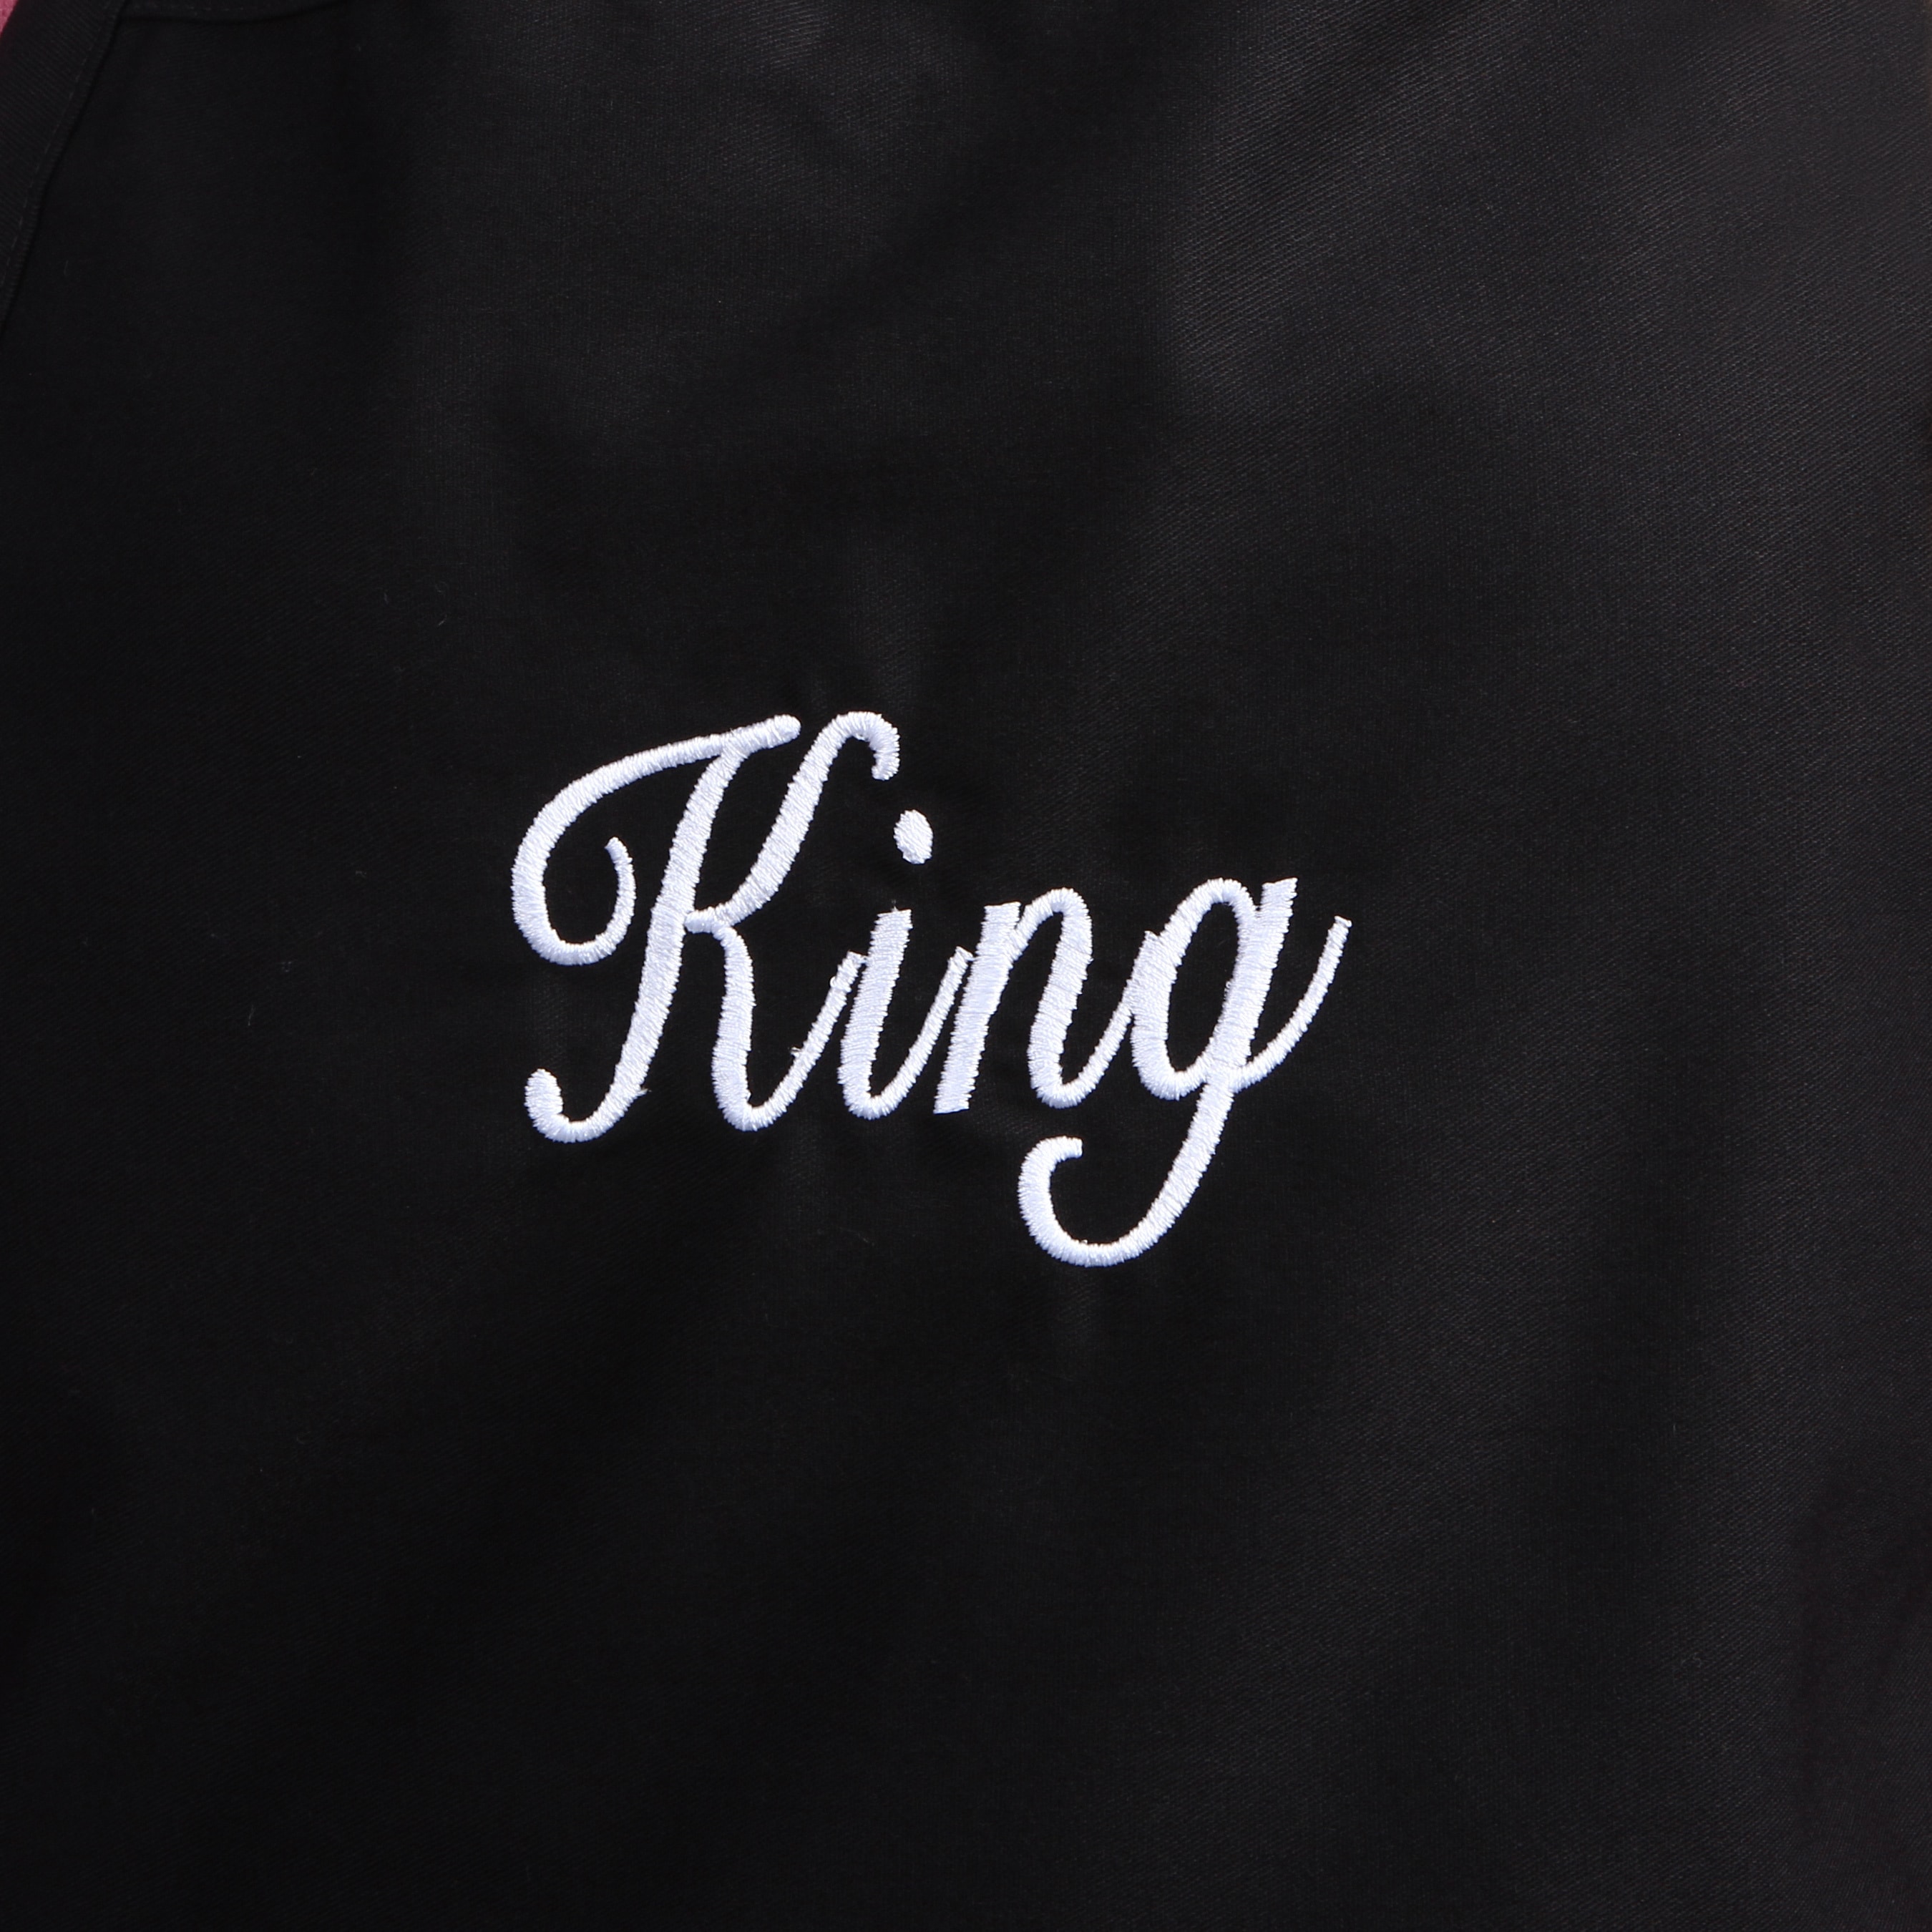 Kaufman Monogrammed Queen or King Apron with two Pockets